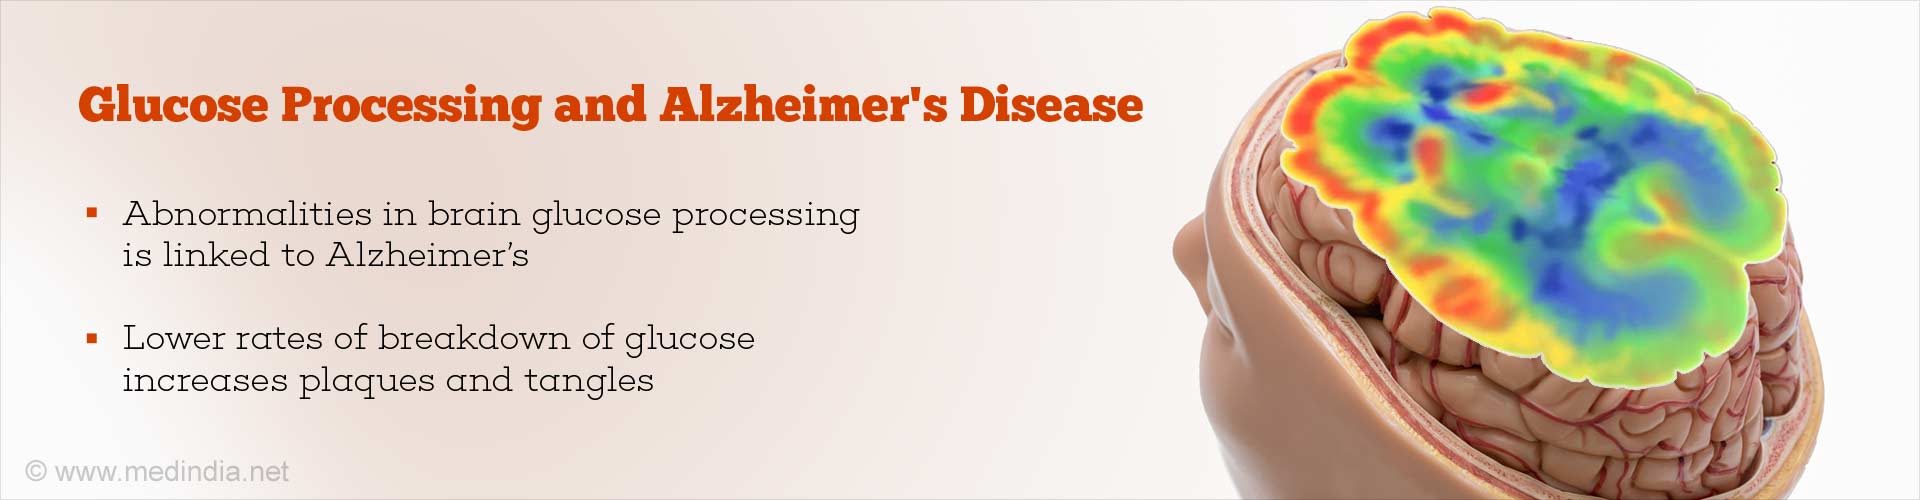 Glucose processing and Alzheimer's disease
- Abnormalities in brain glucose processing is linked to Alzheimer's
- Lower rates of breakdown of glucose increases plaques and tangles